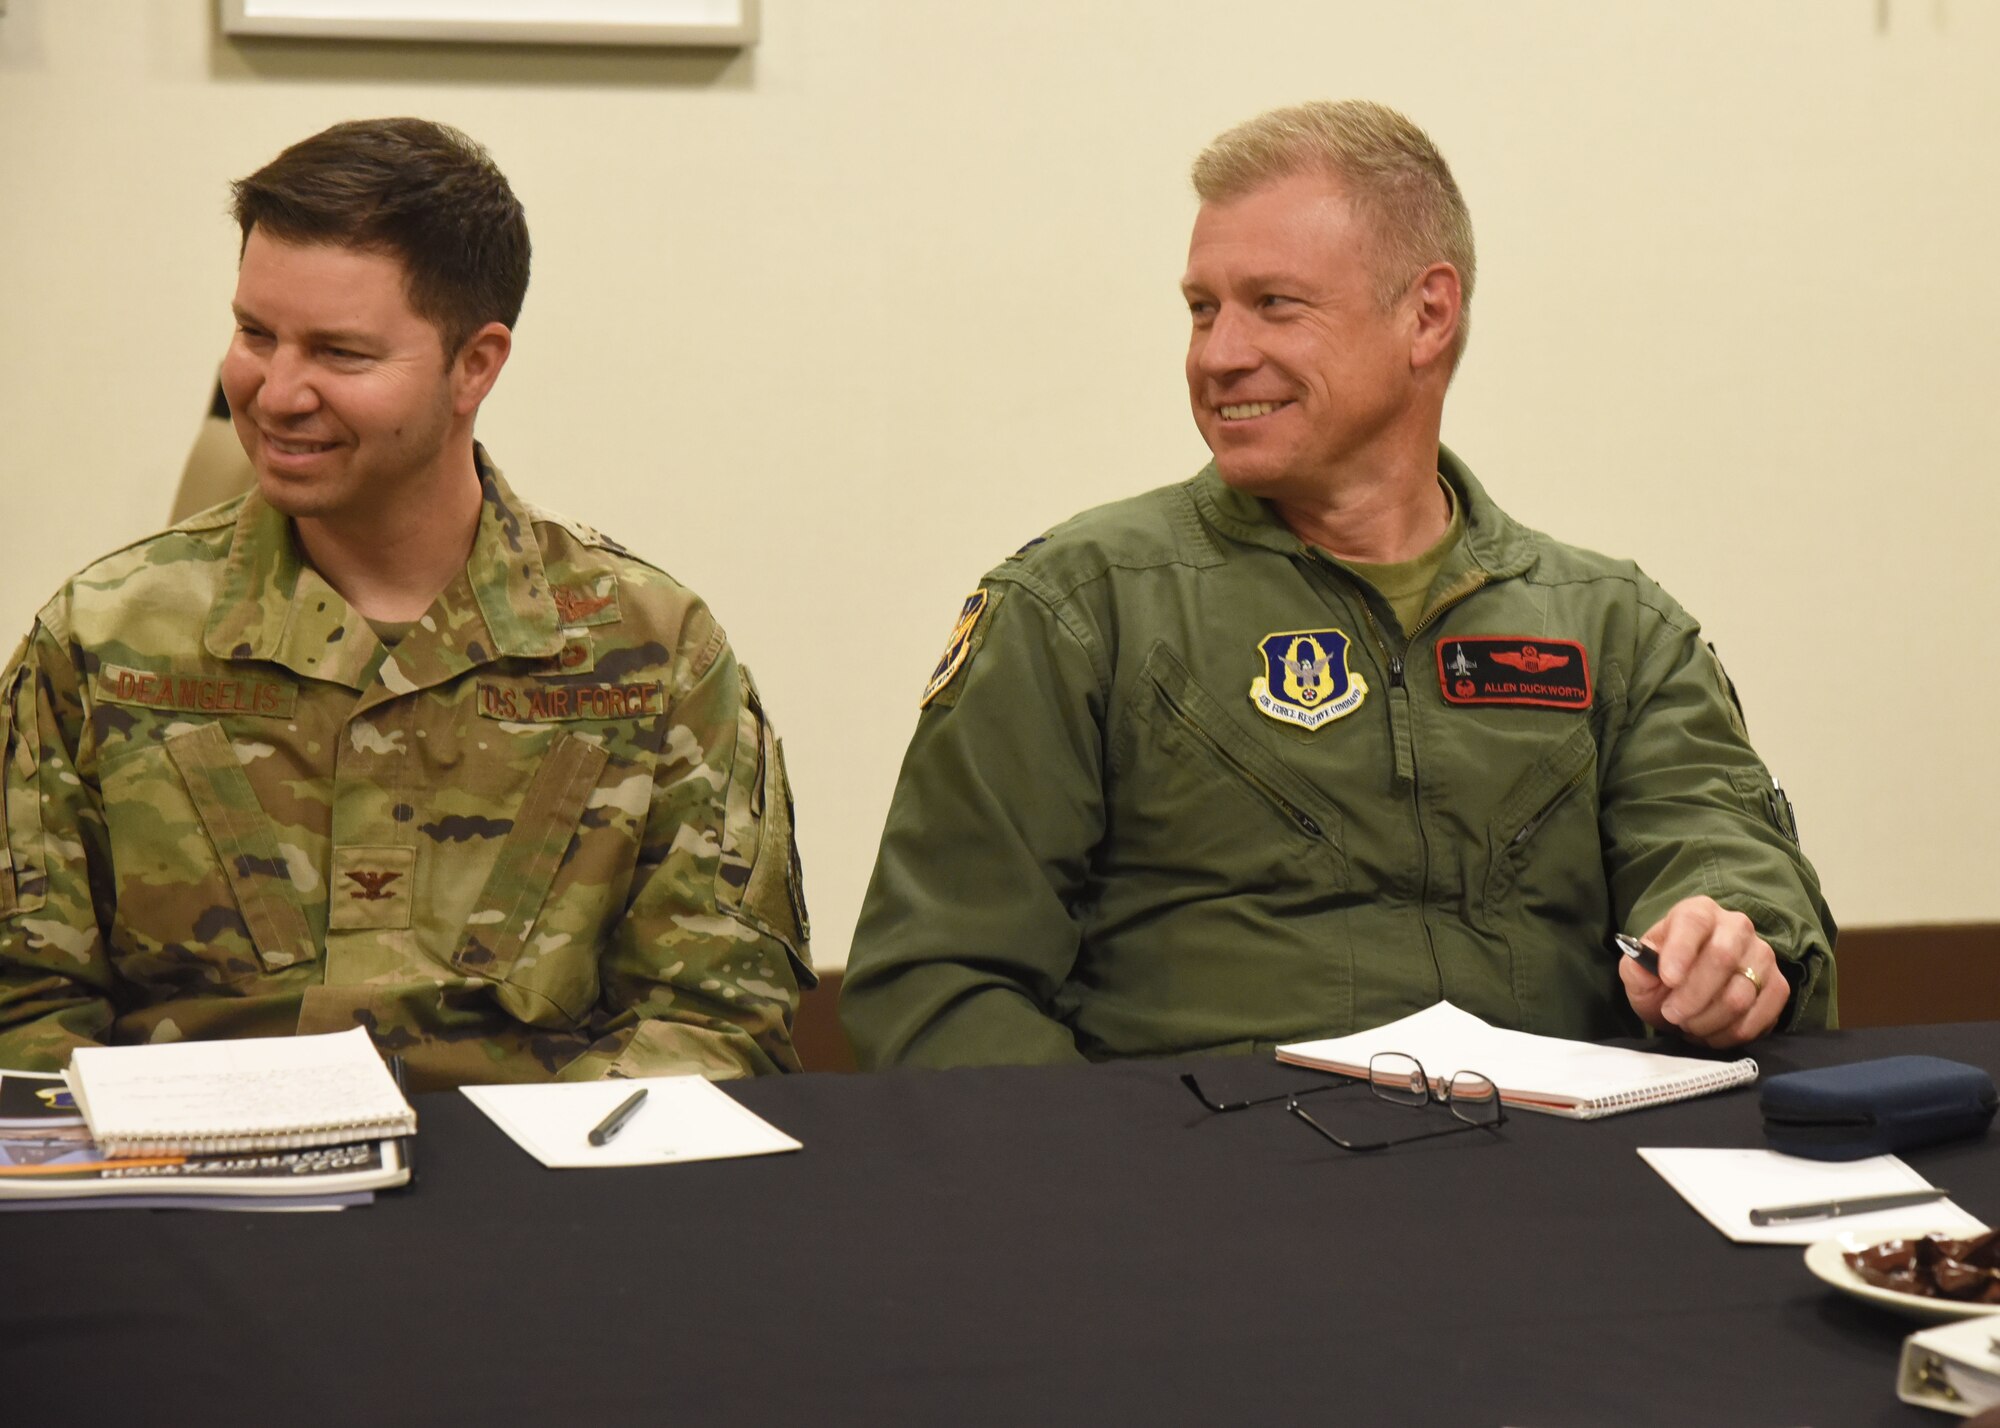 Col. David A. DeAngelis, left, 610th Command and Control Squadron commander and Col. Allen E. Duckworth, 301st Fighter Wing commander, attend the Annual Commanders and Command Chiefs management and leadership review event held in Fort Worth, Texas, June 20-23. The three-day session focused on disseminating information from 10th AF senior leaders to commanders and chiefs on various topics to include budgeting, recruitment challenges and force restructure. (U.S. Air Force photo by 2nd Lt. Mary A. Andom)